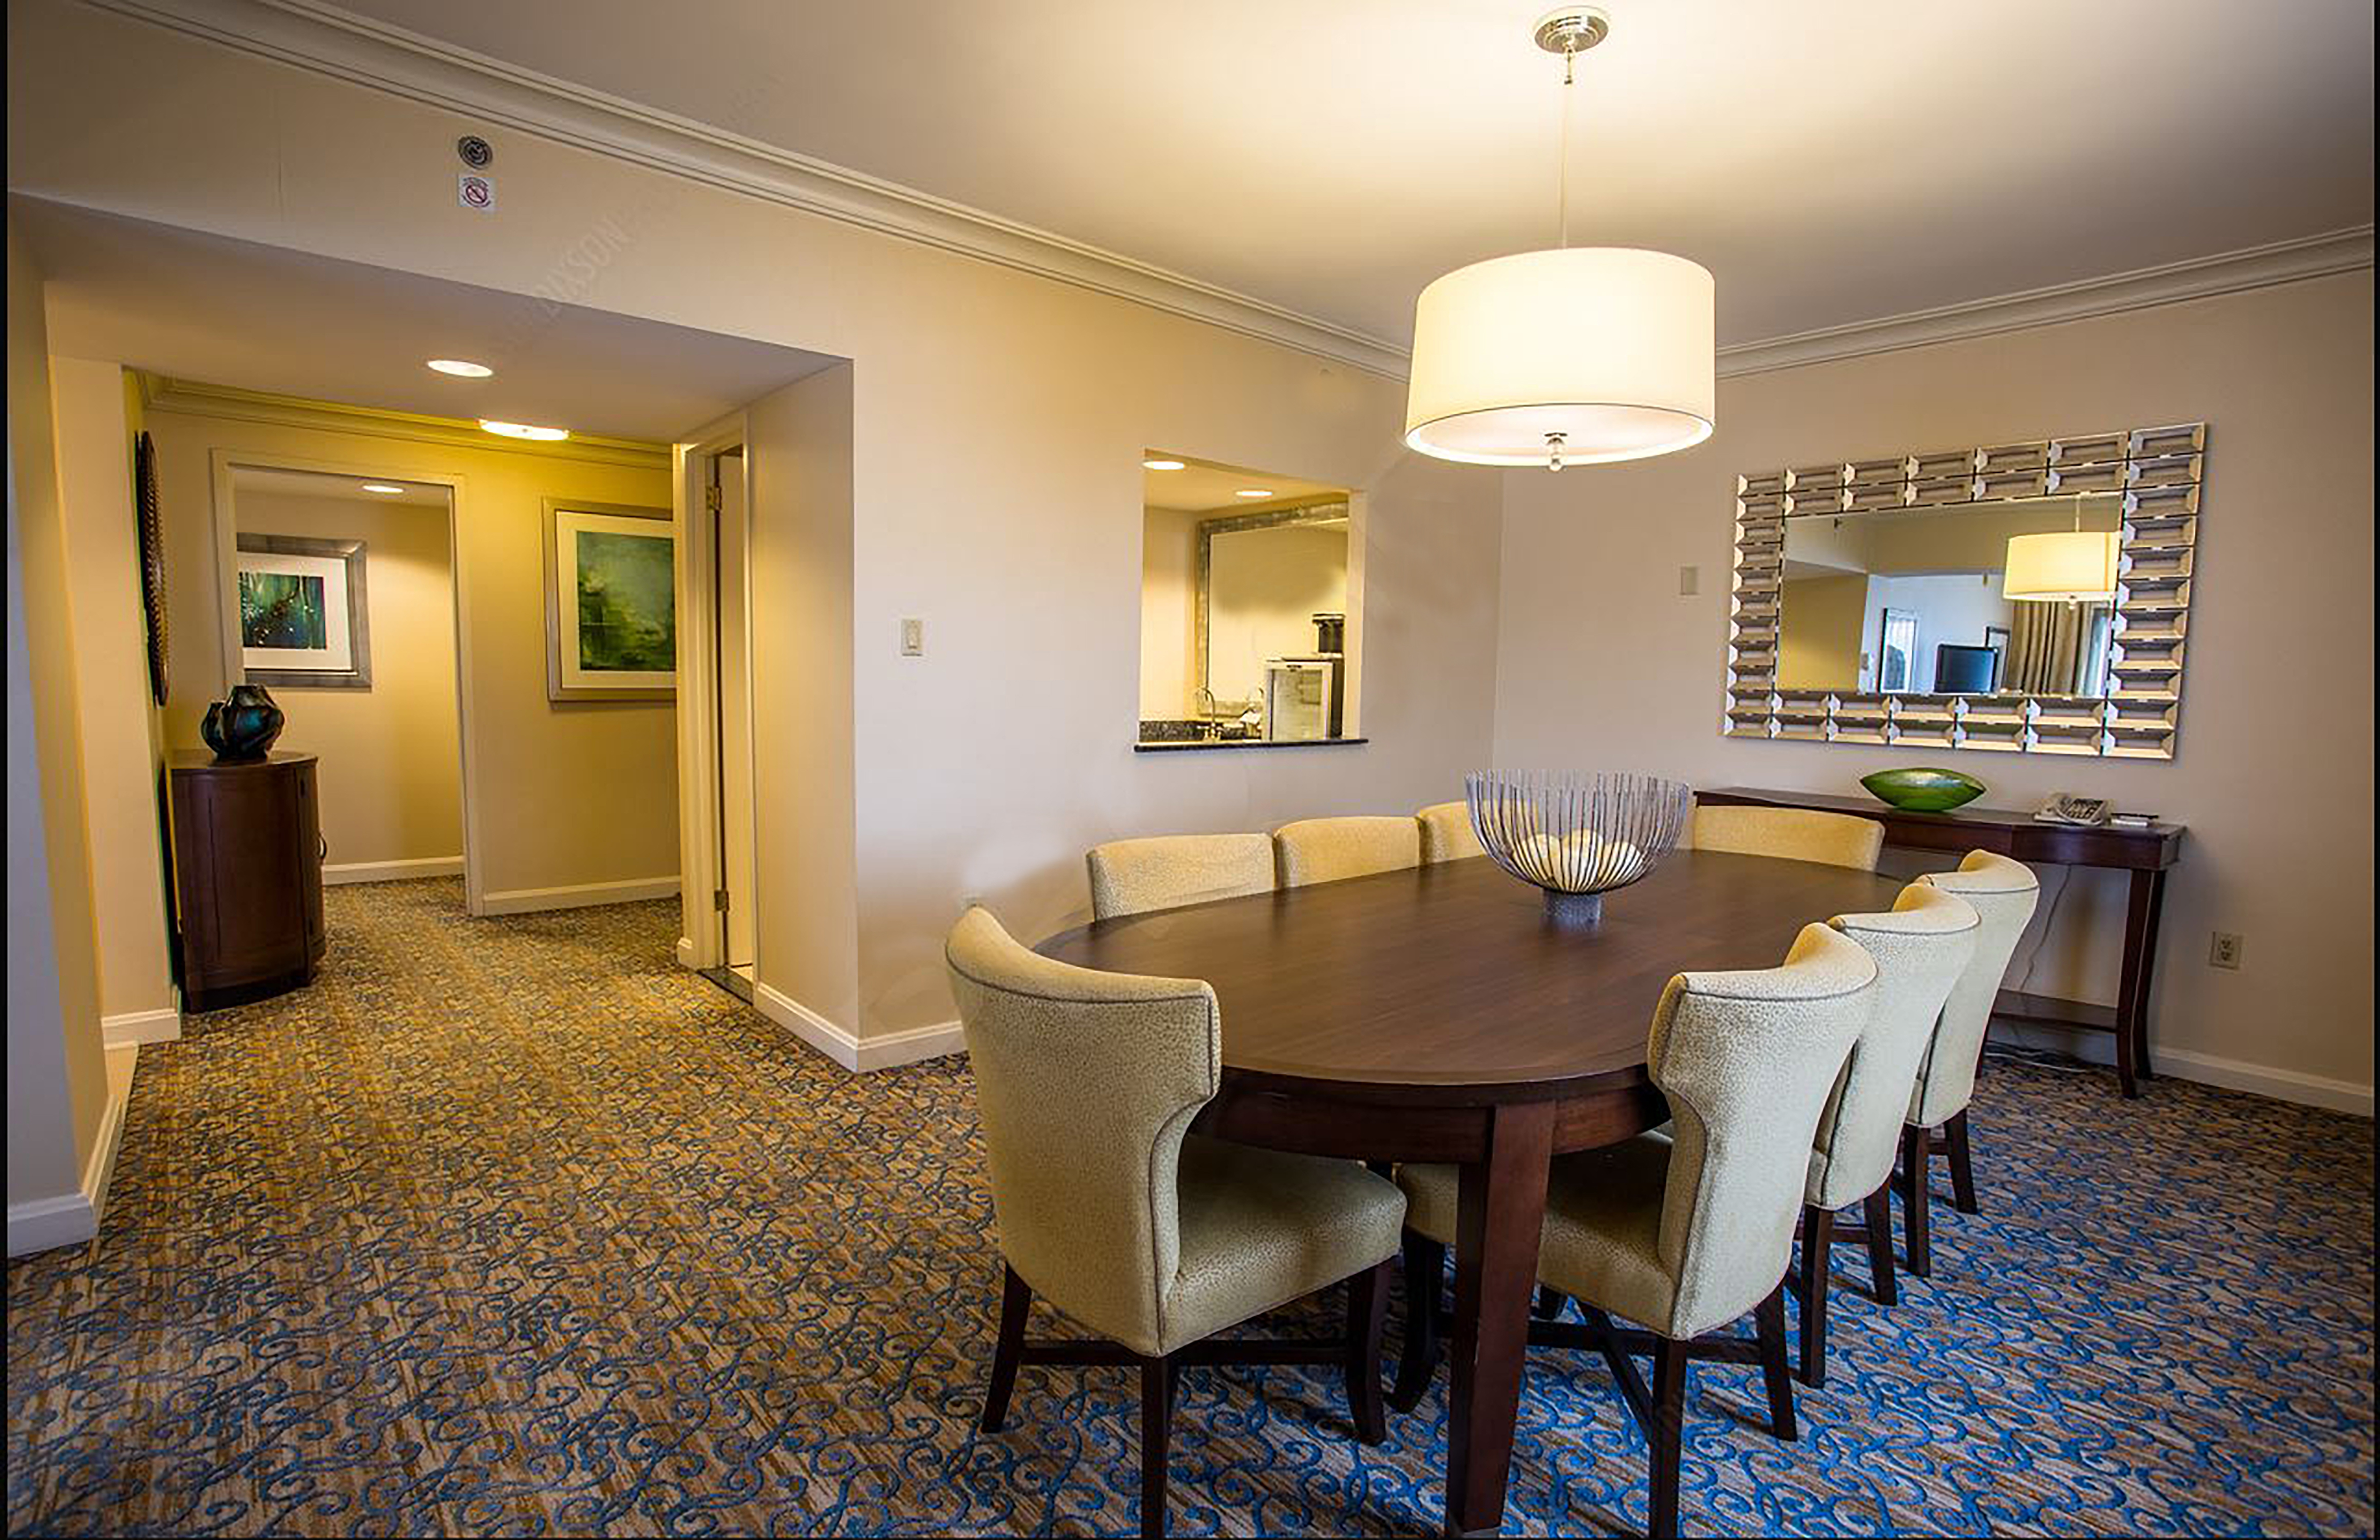 Guest Suite Dining Area with Table and Chairs